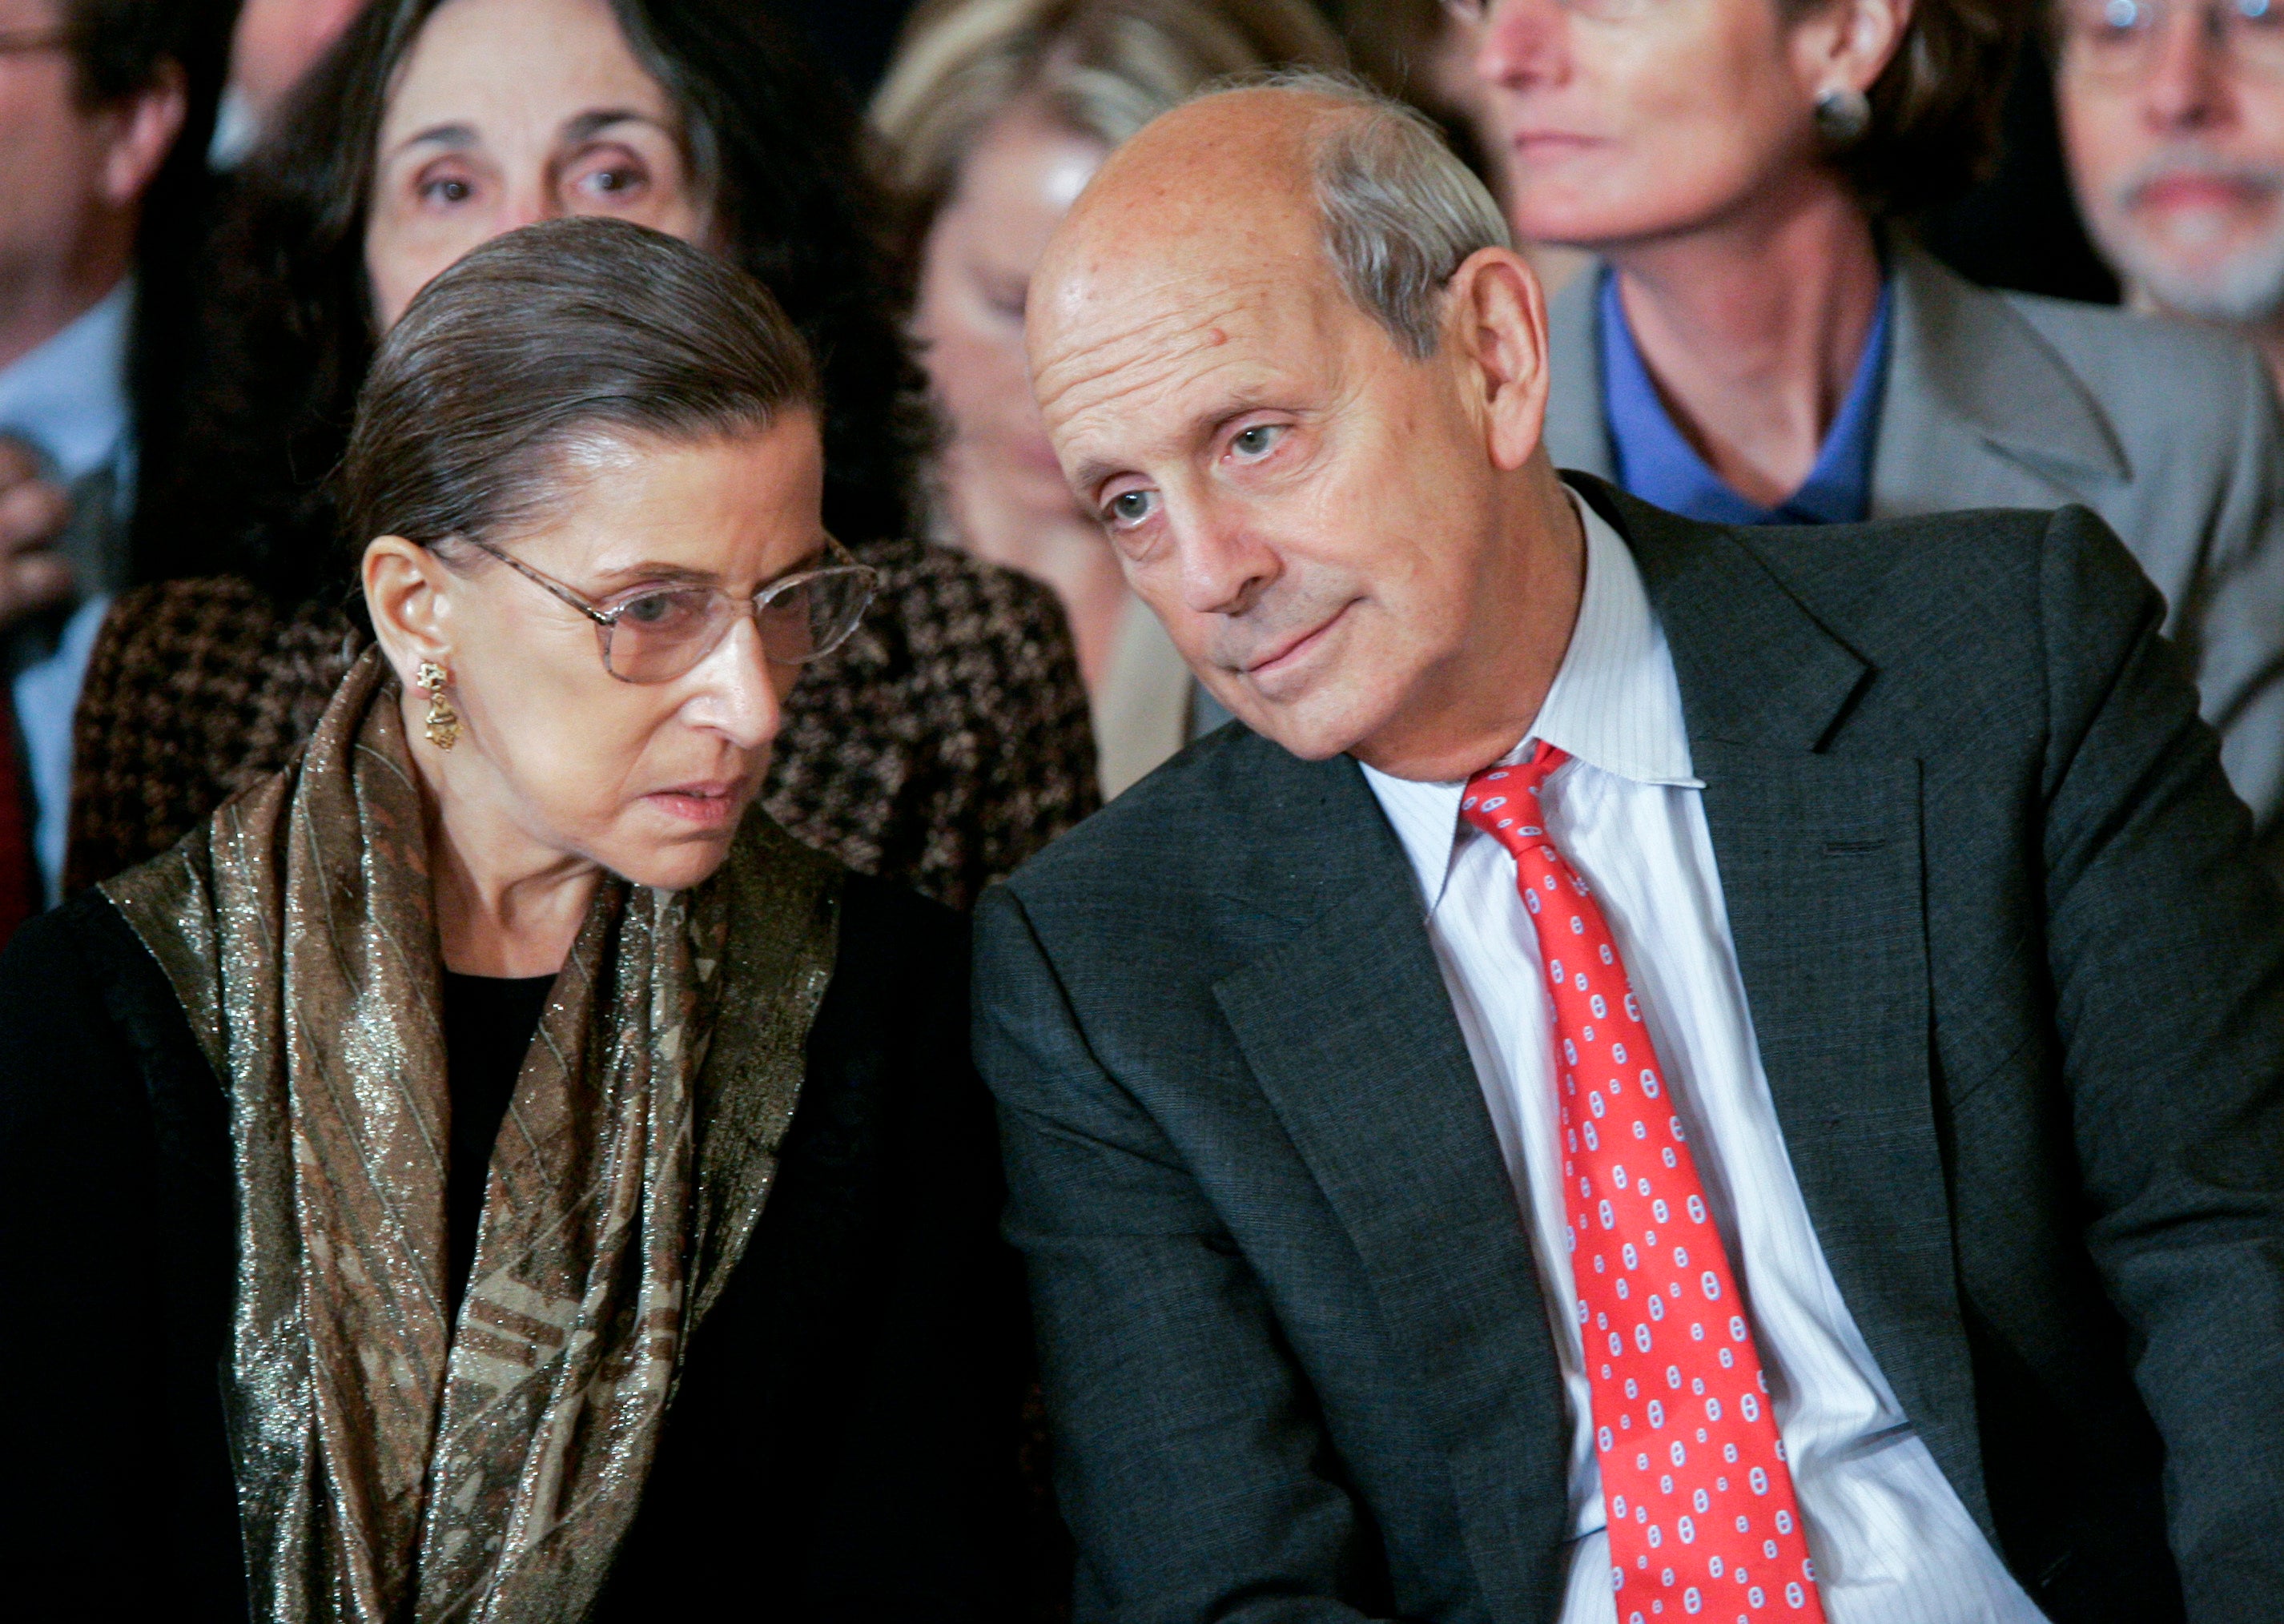 File photo: Supreme Court judges Ruth Bader Ginsburg (left) and Stephen Breyer in the White House in February 2006. Justice Ginsburg, considered a liberal stalwart, died in September 2020